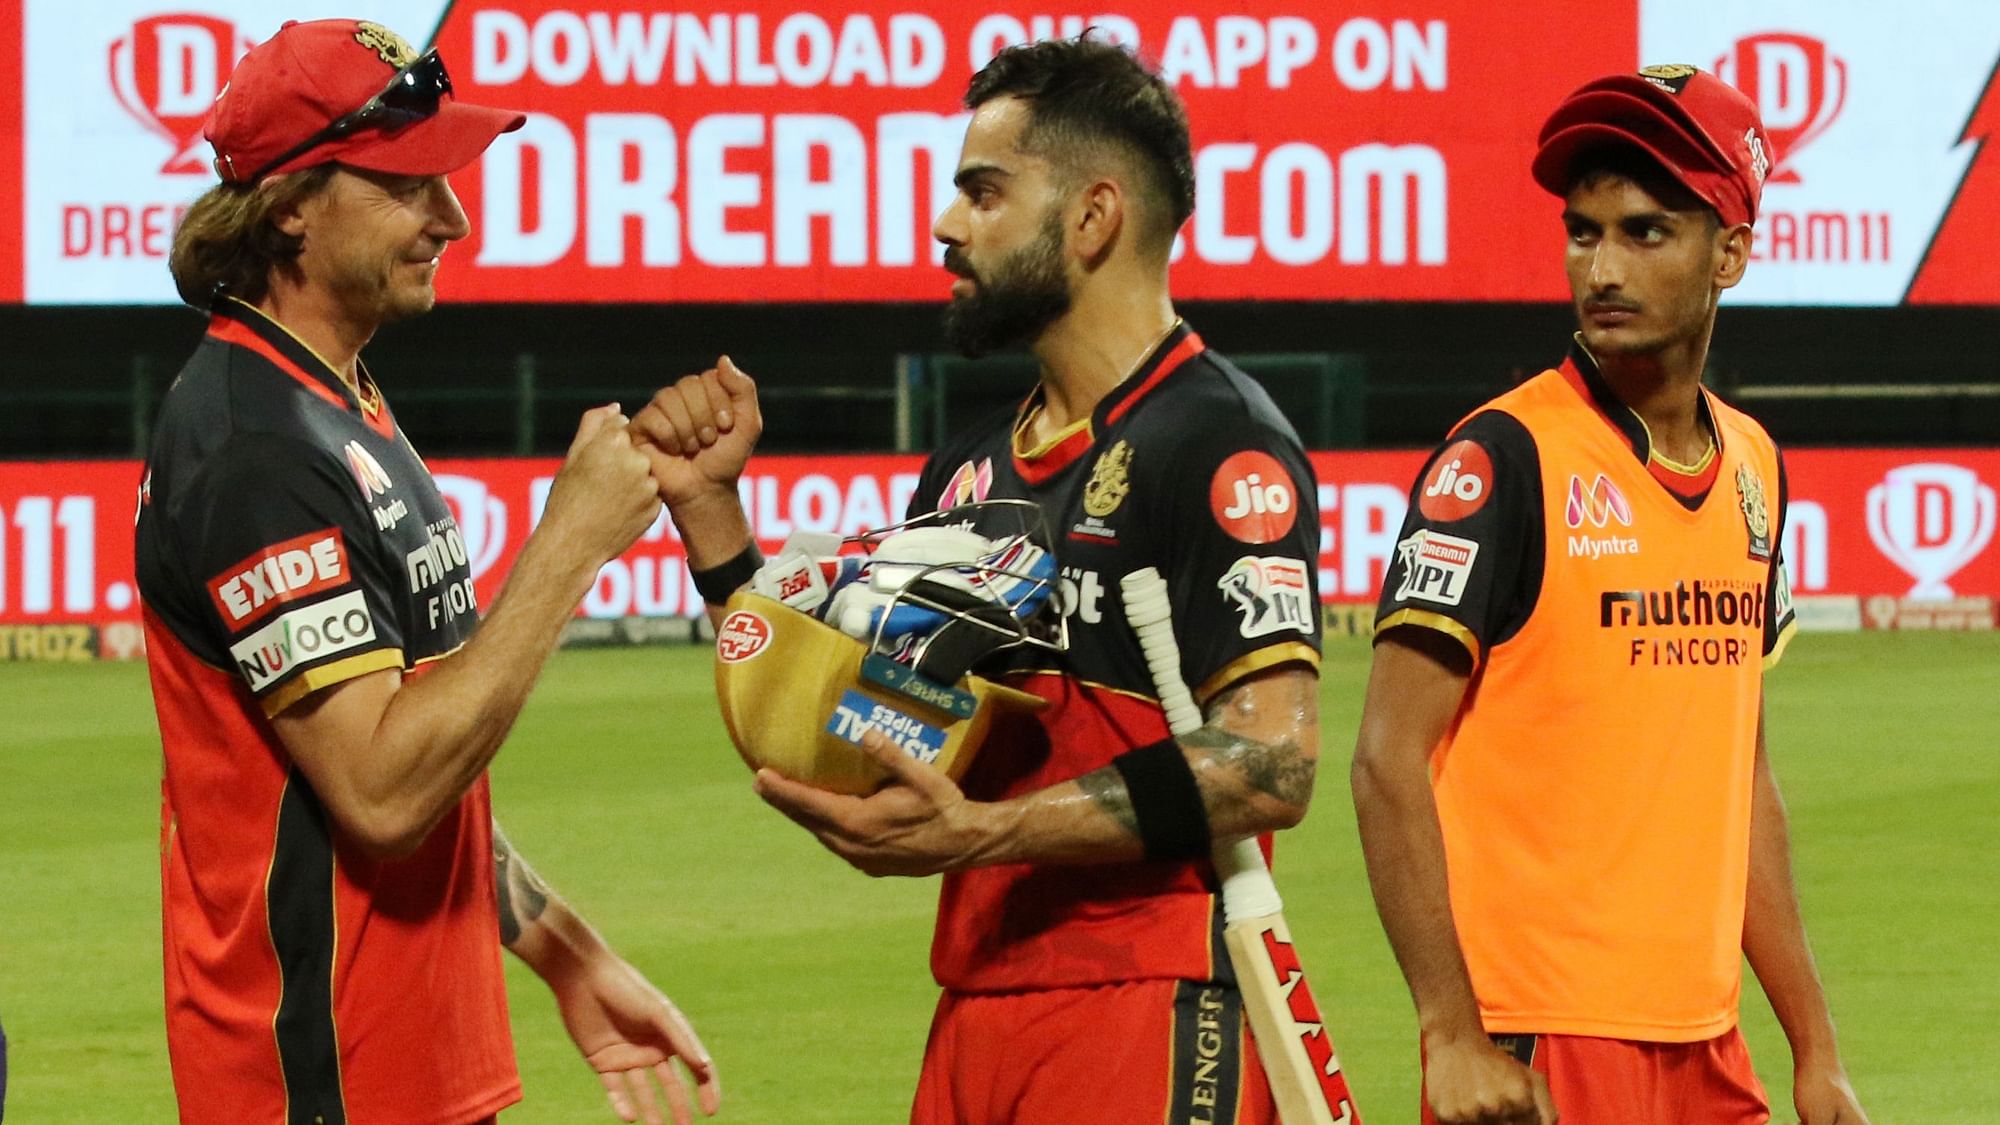 Royal Challengers Bangalore by the virtue of Wednesday’s win notched up their 7th win of this IPL and are now second on the points table